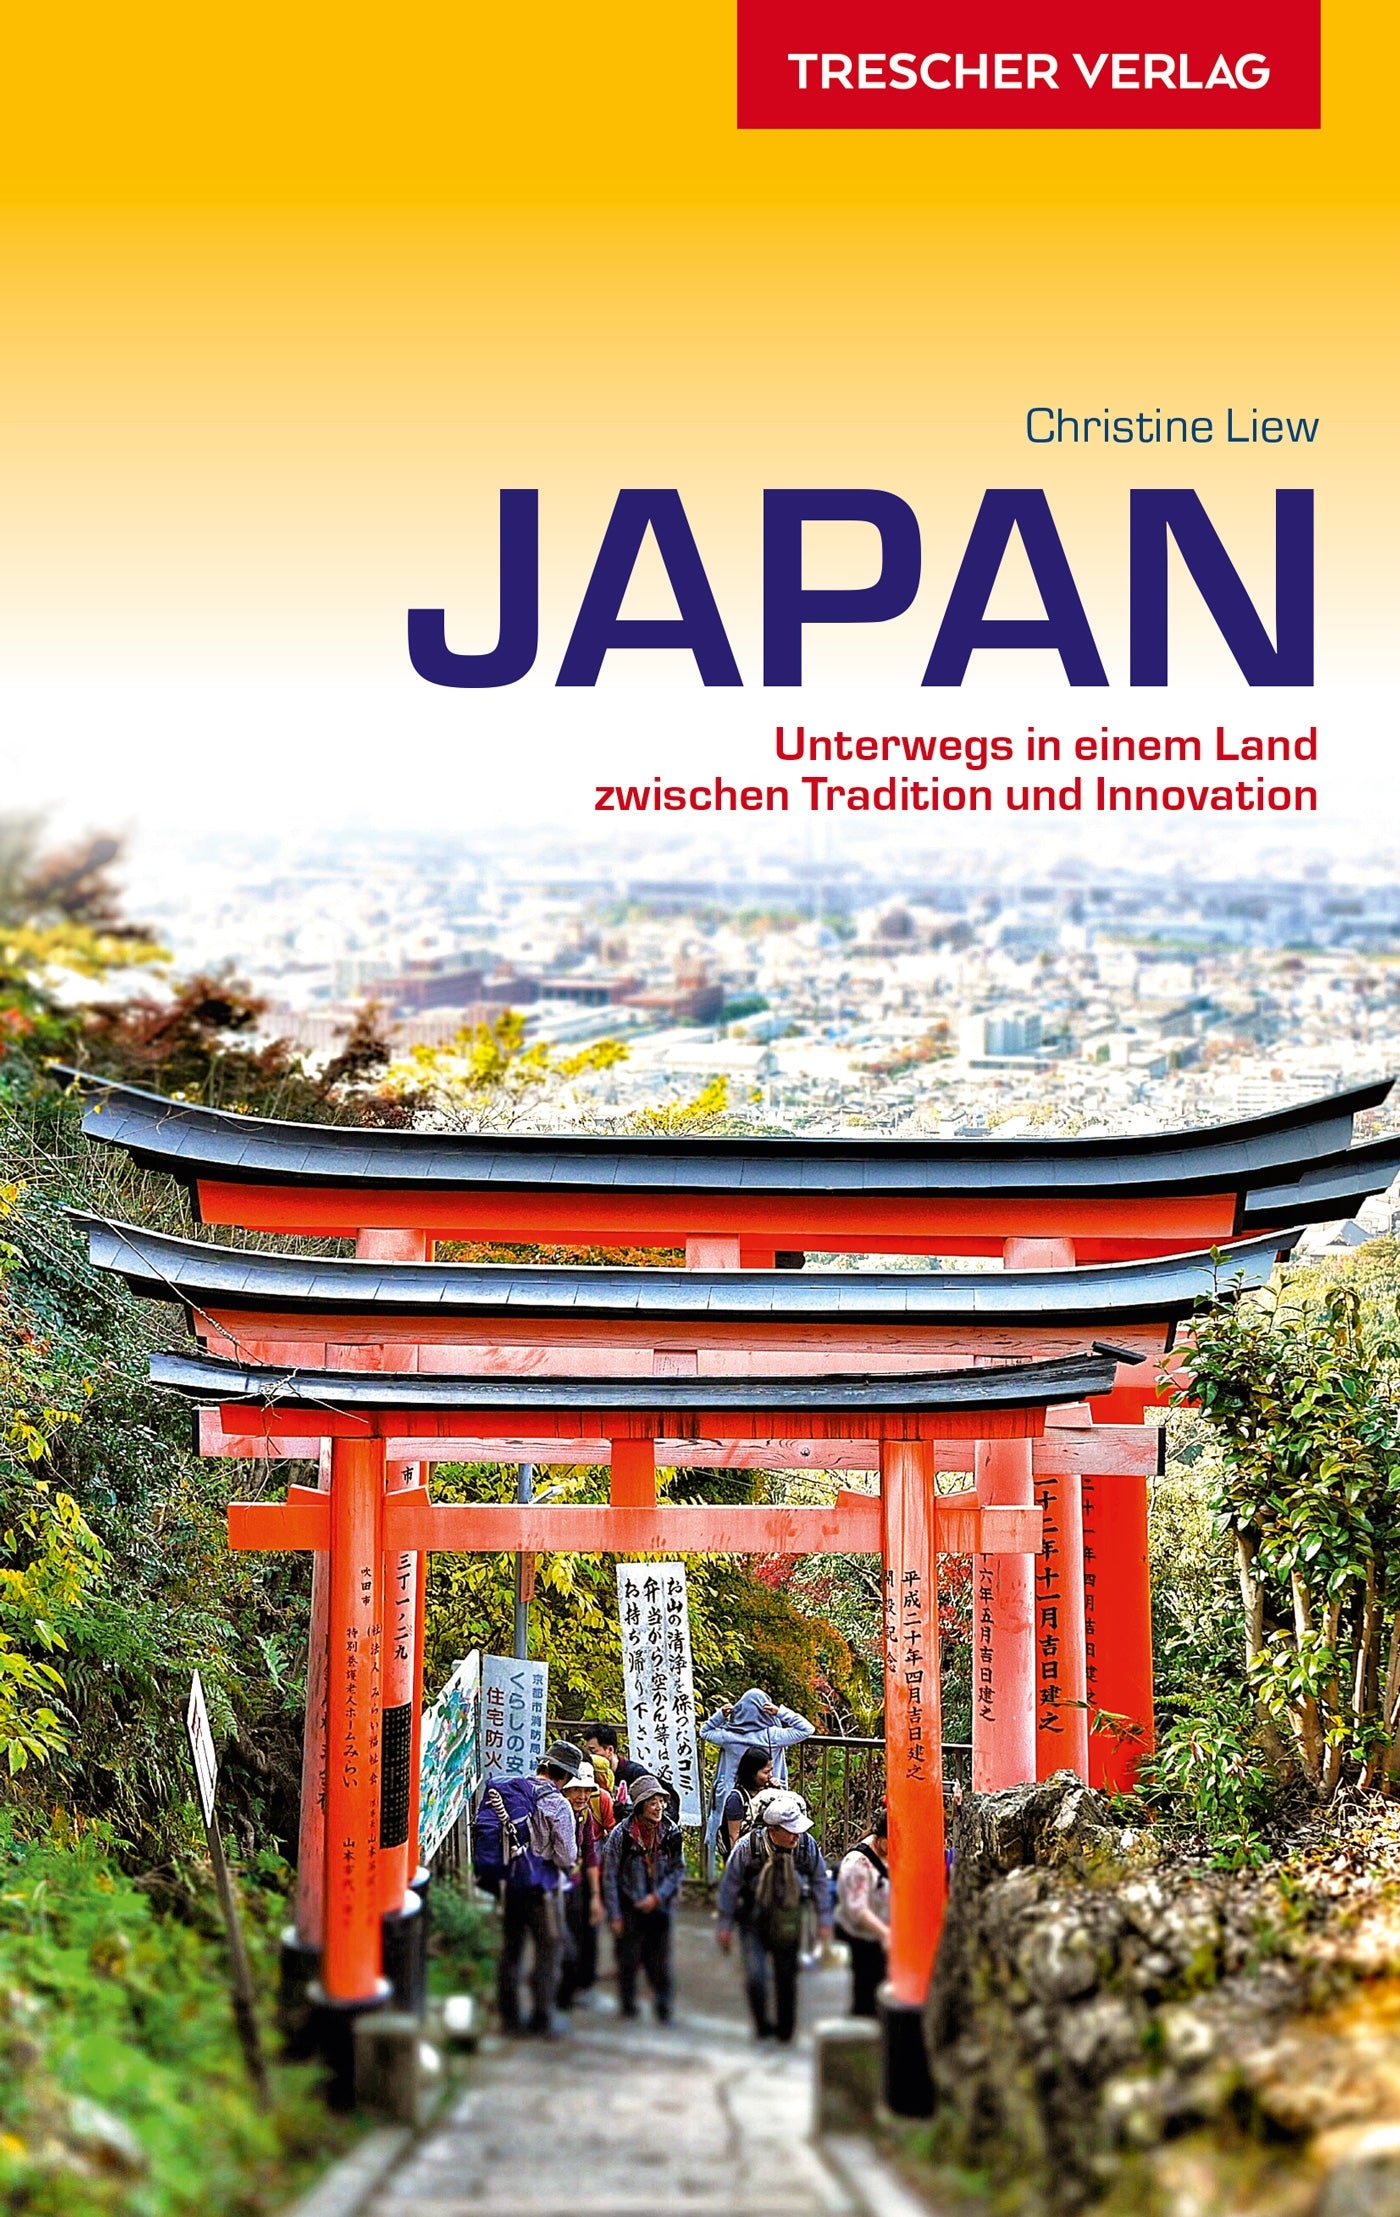 Travel guide Japan 4.A 2018